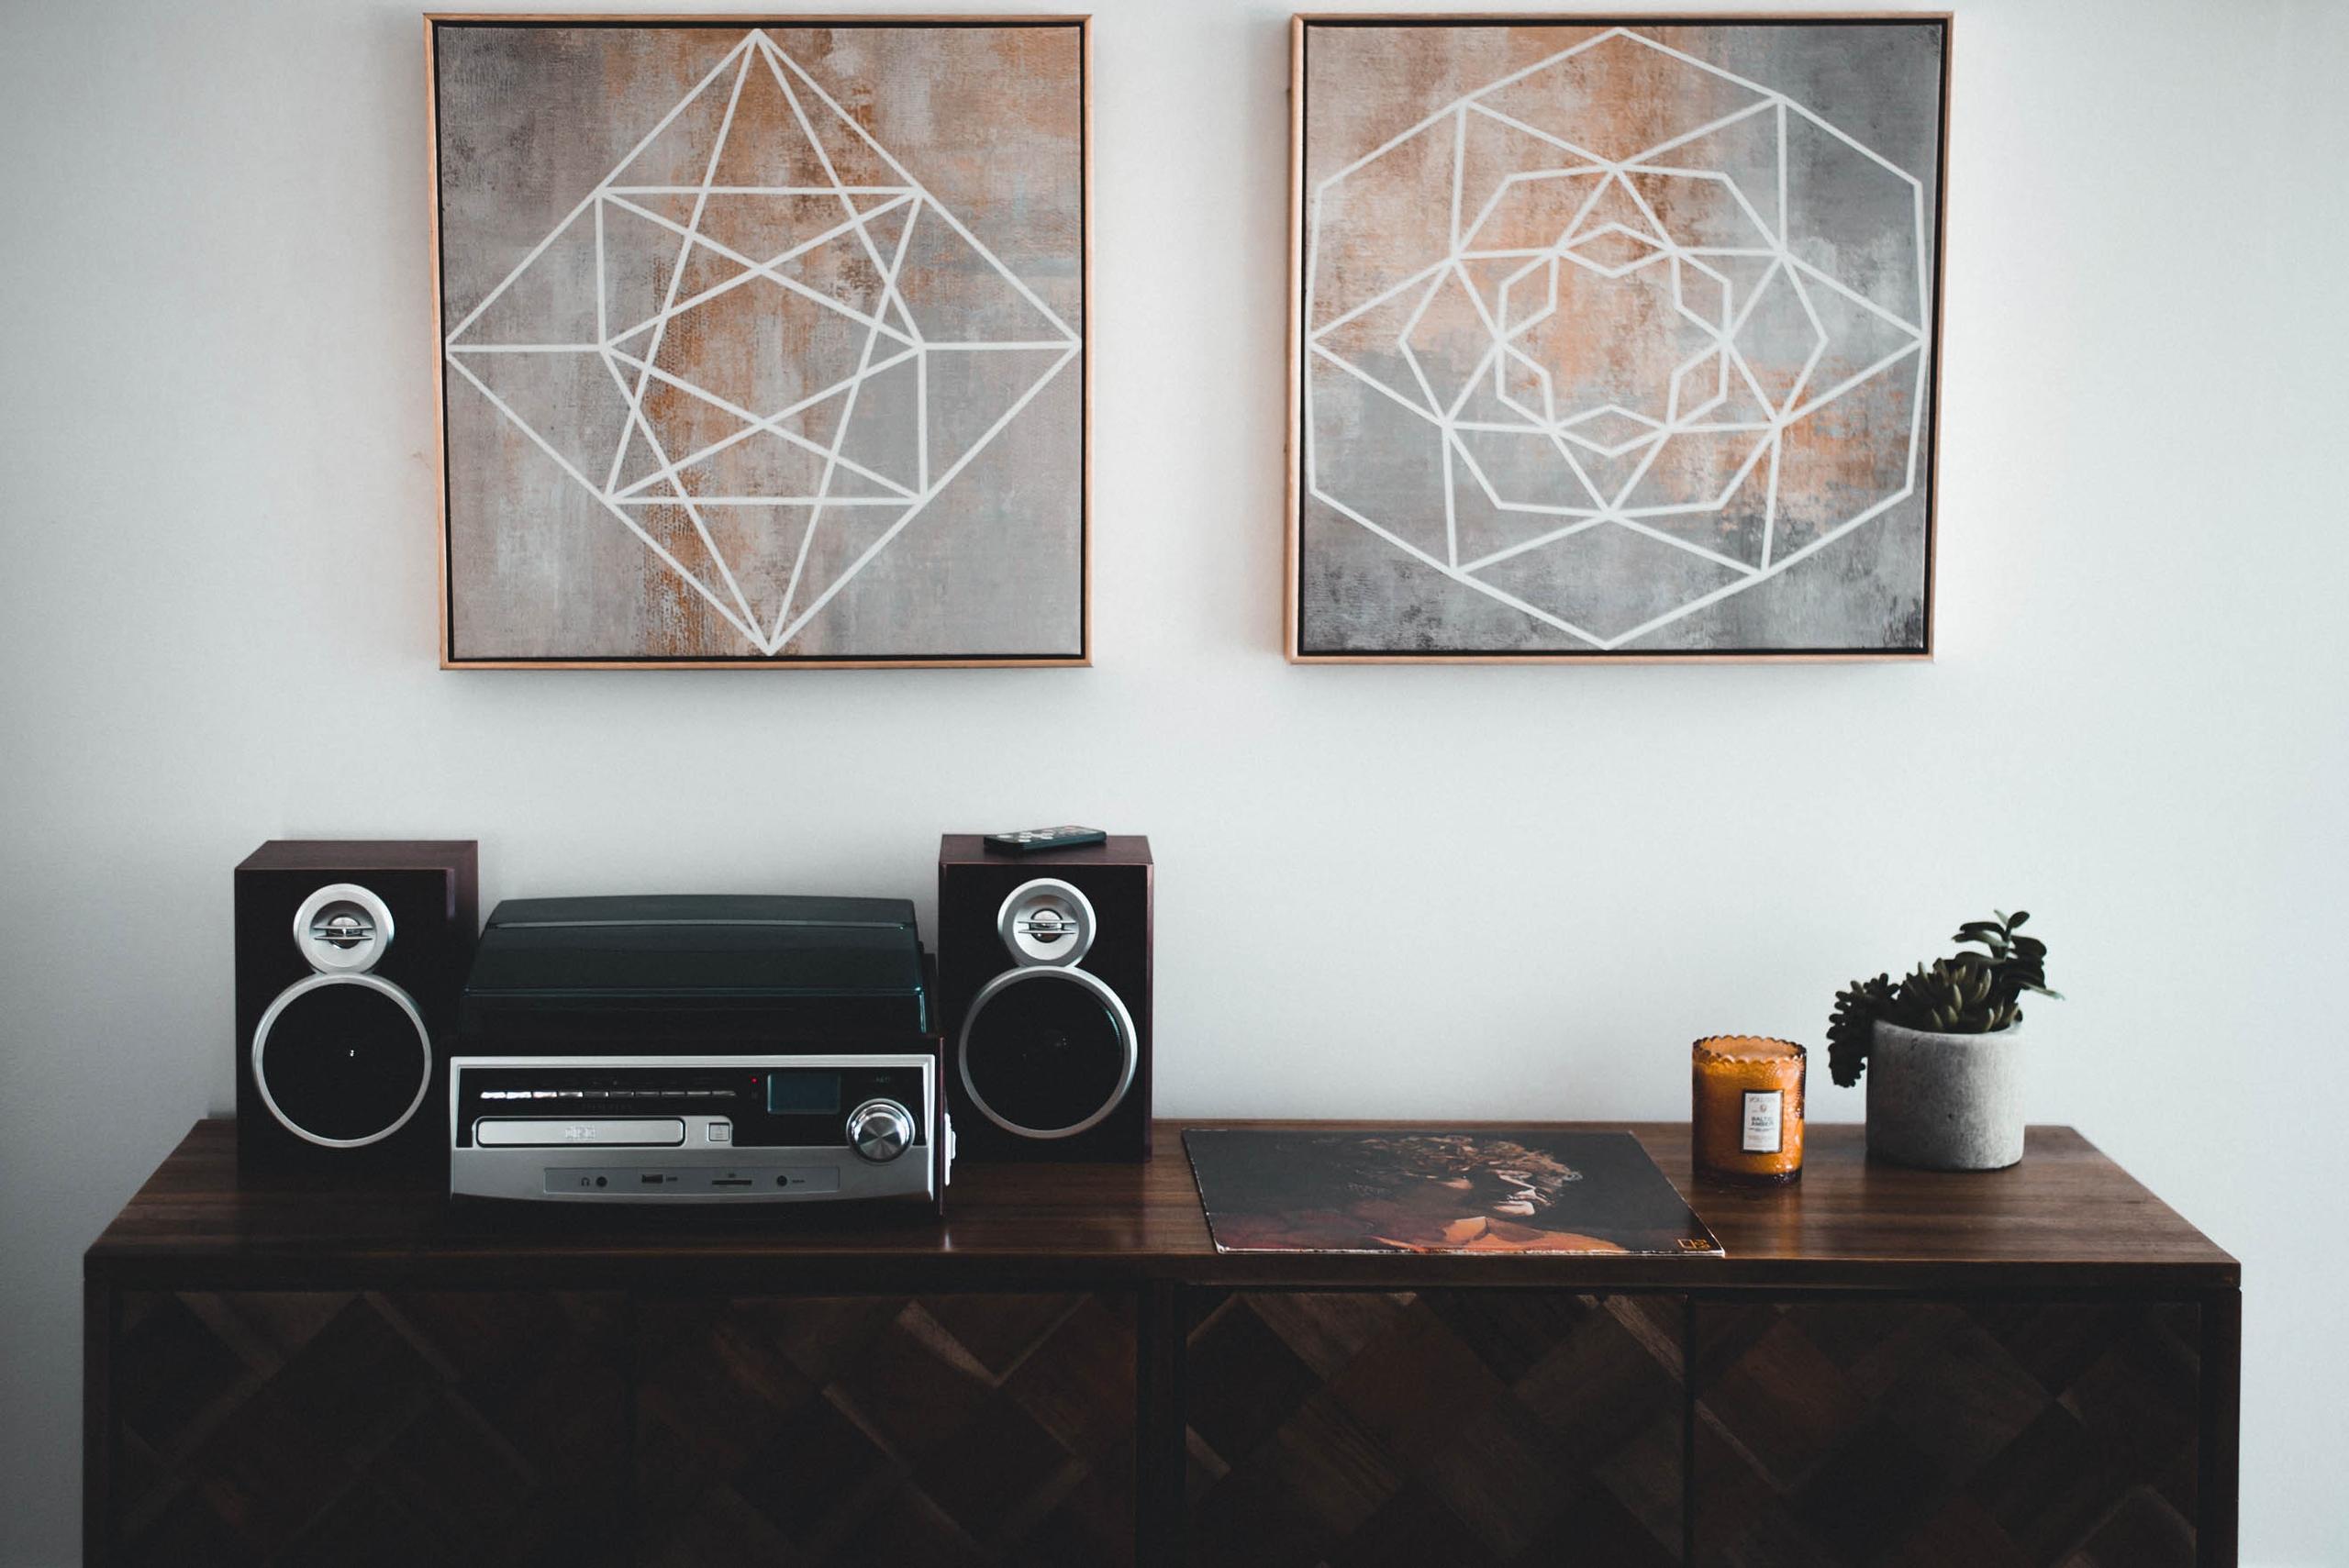 Wired Vs. Wireless Audio Systems Quality, Convenience And Reliability